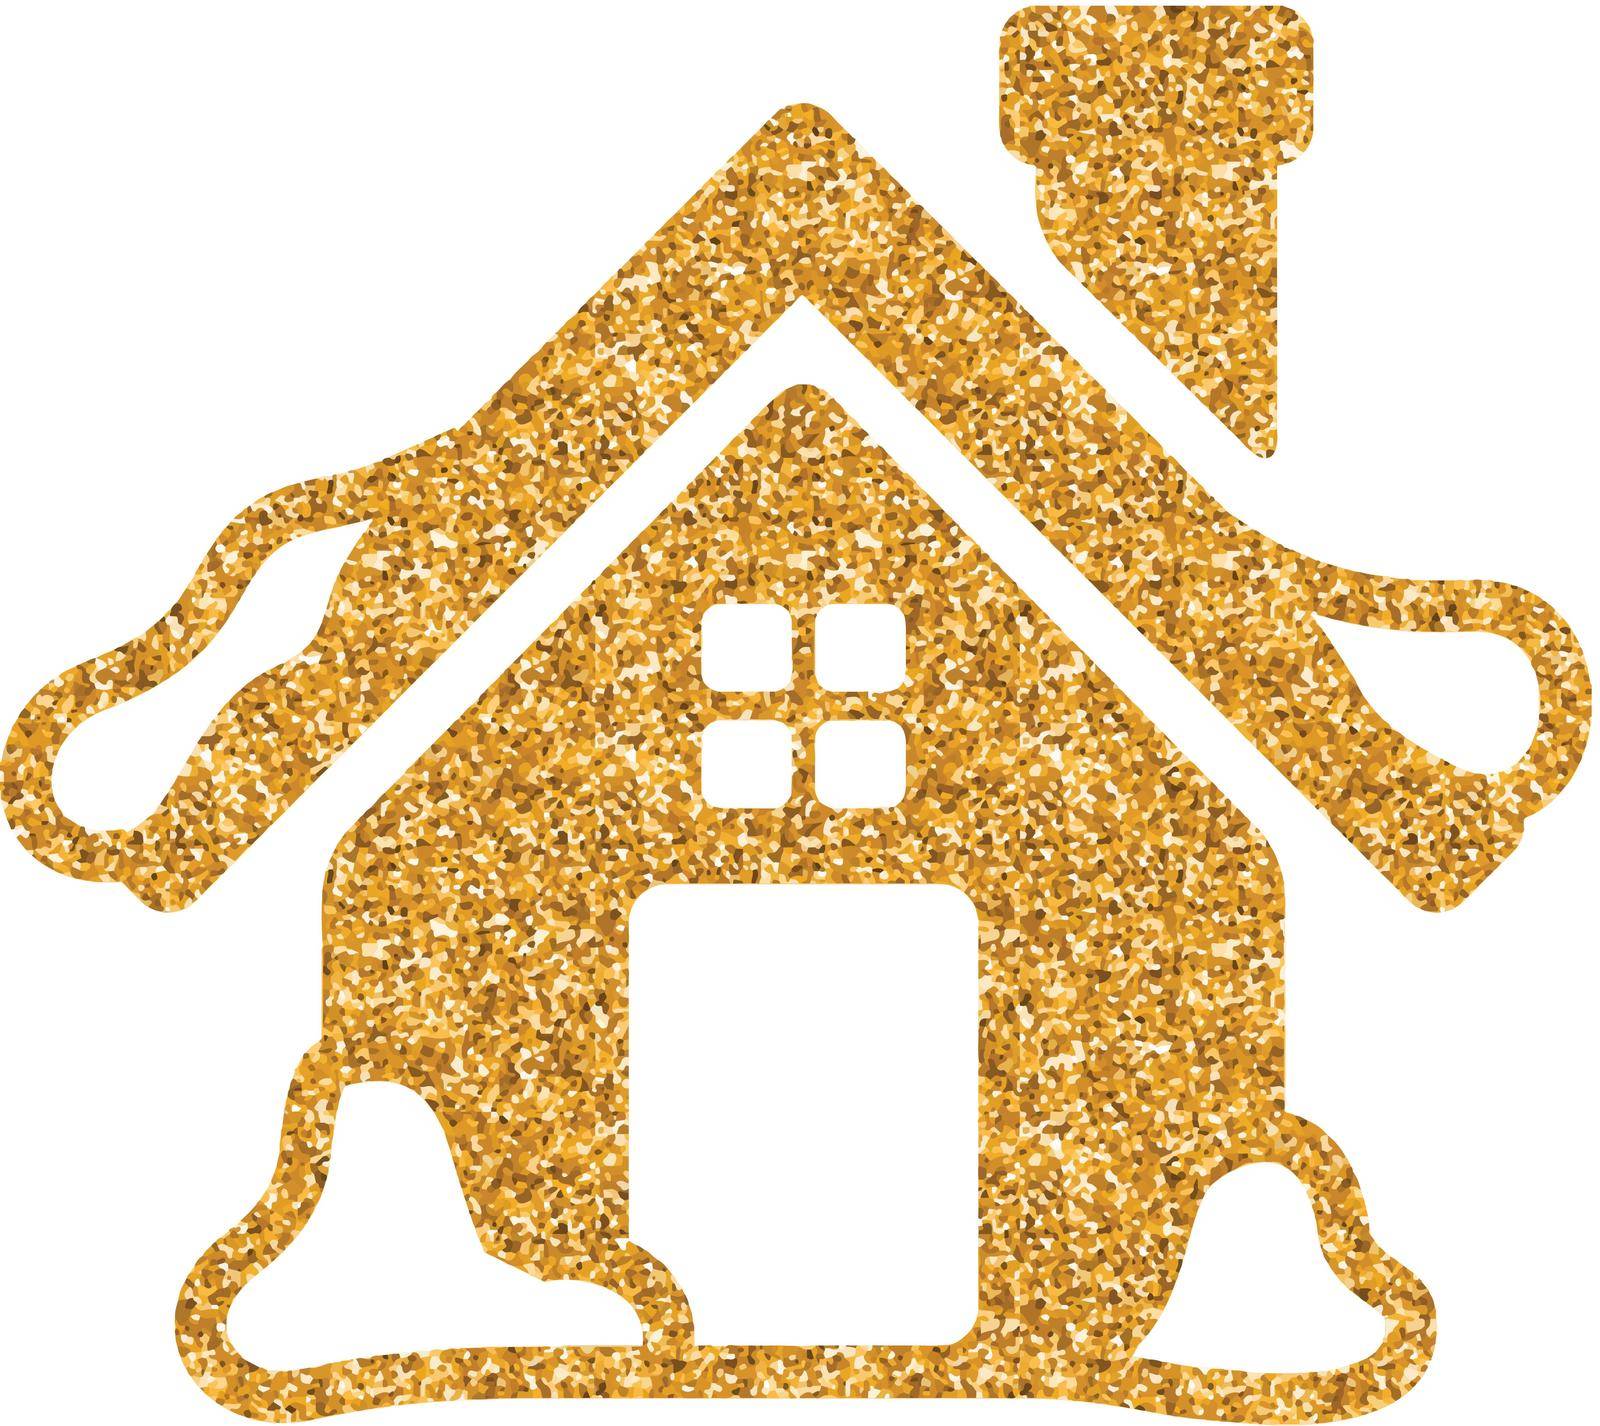 House with snow icon in gold glitter texture. Sparkle luxury style vector illustration.